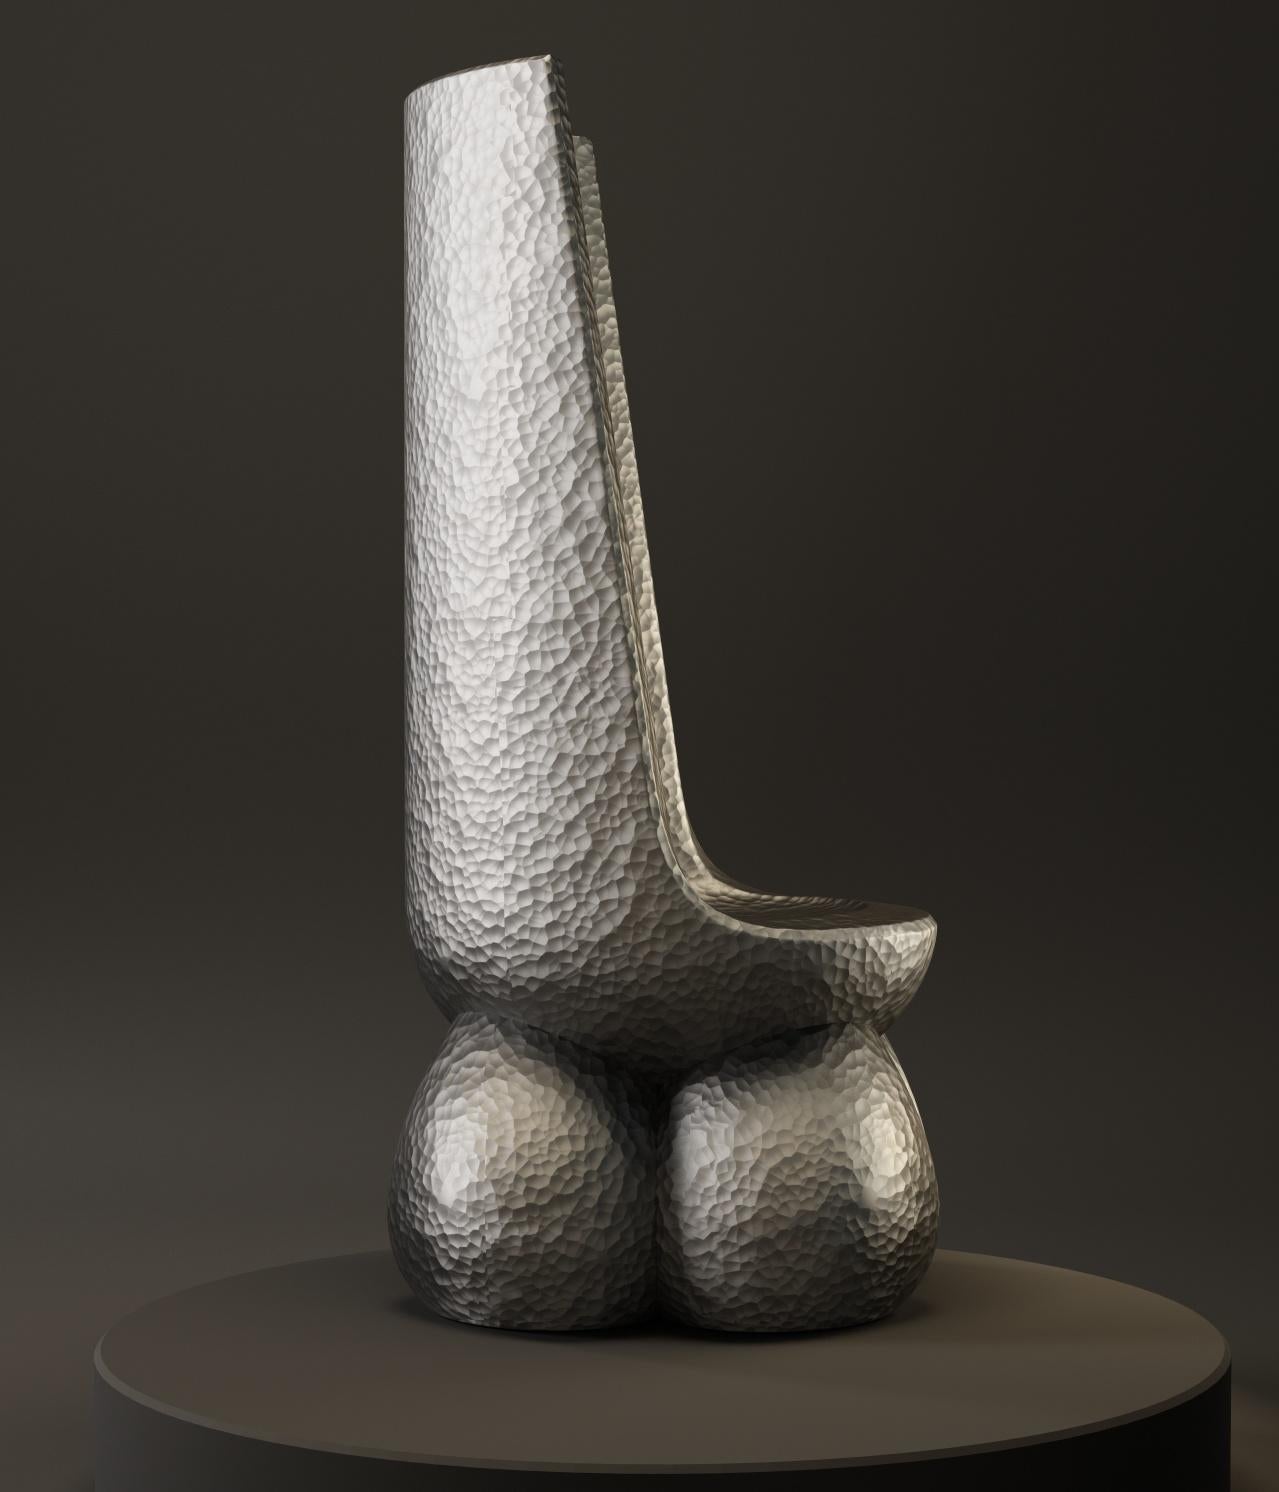 A massive aluminium chair, penetrated with warmth and energy of handwork.
Elegant shape and free lines together with the massiveness and brutality are combined in one image of the «EMPEROR» chair. Sculptural chair is aimed to create a unique